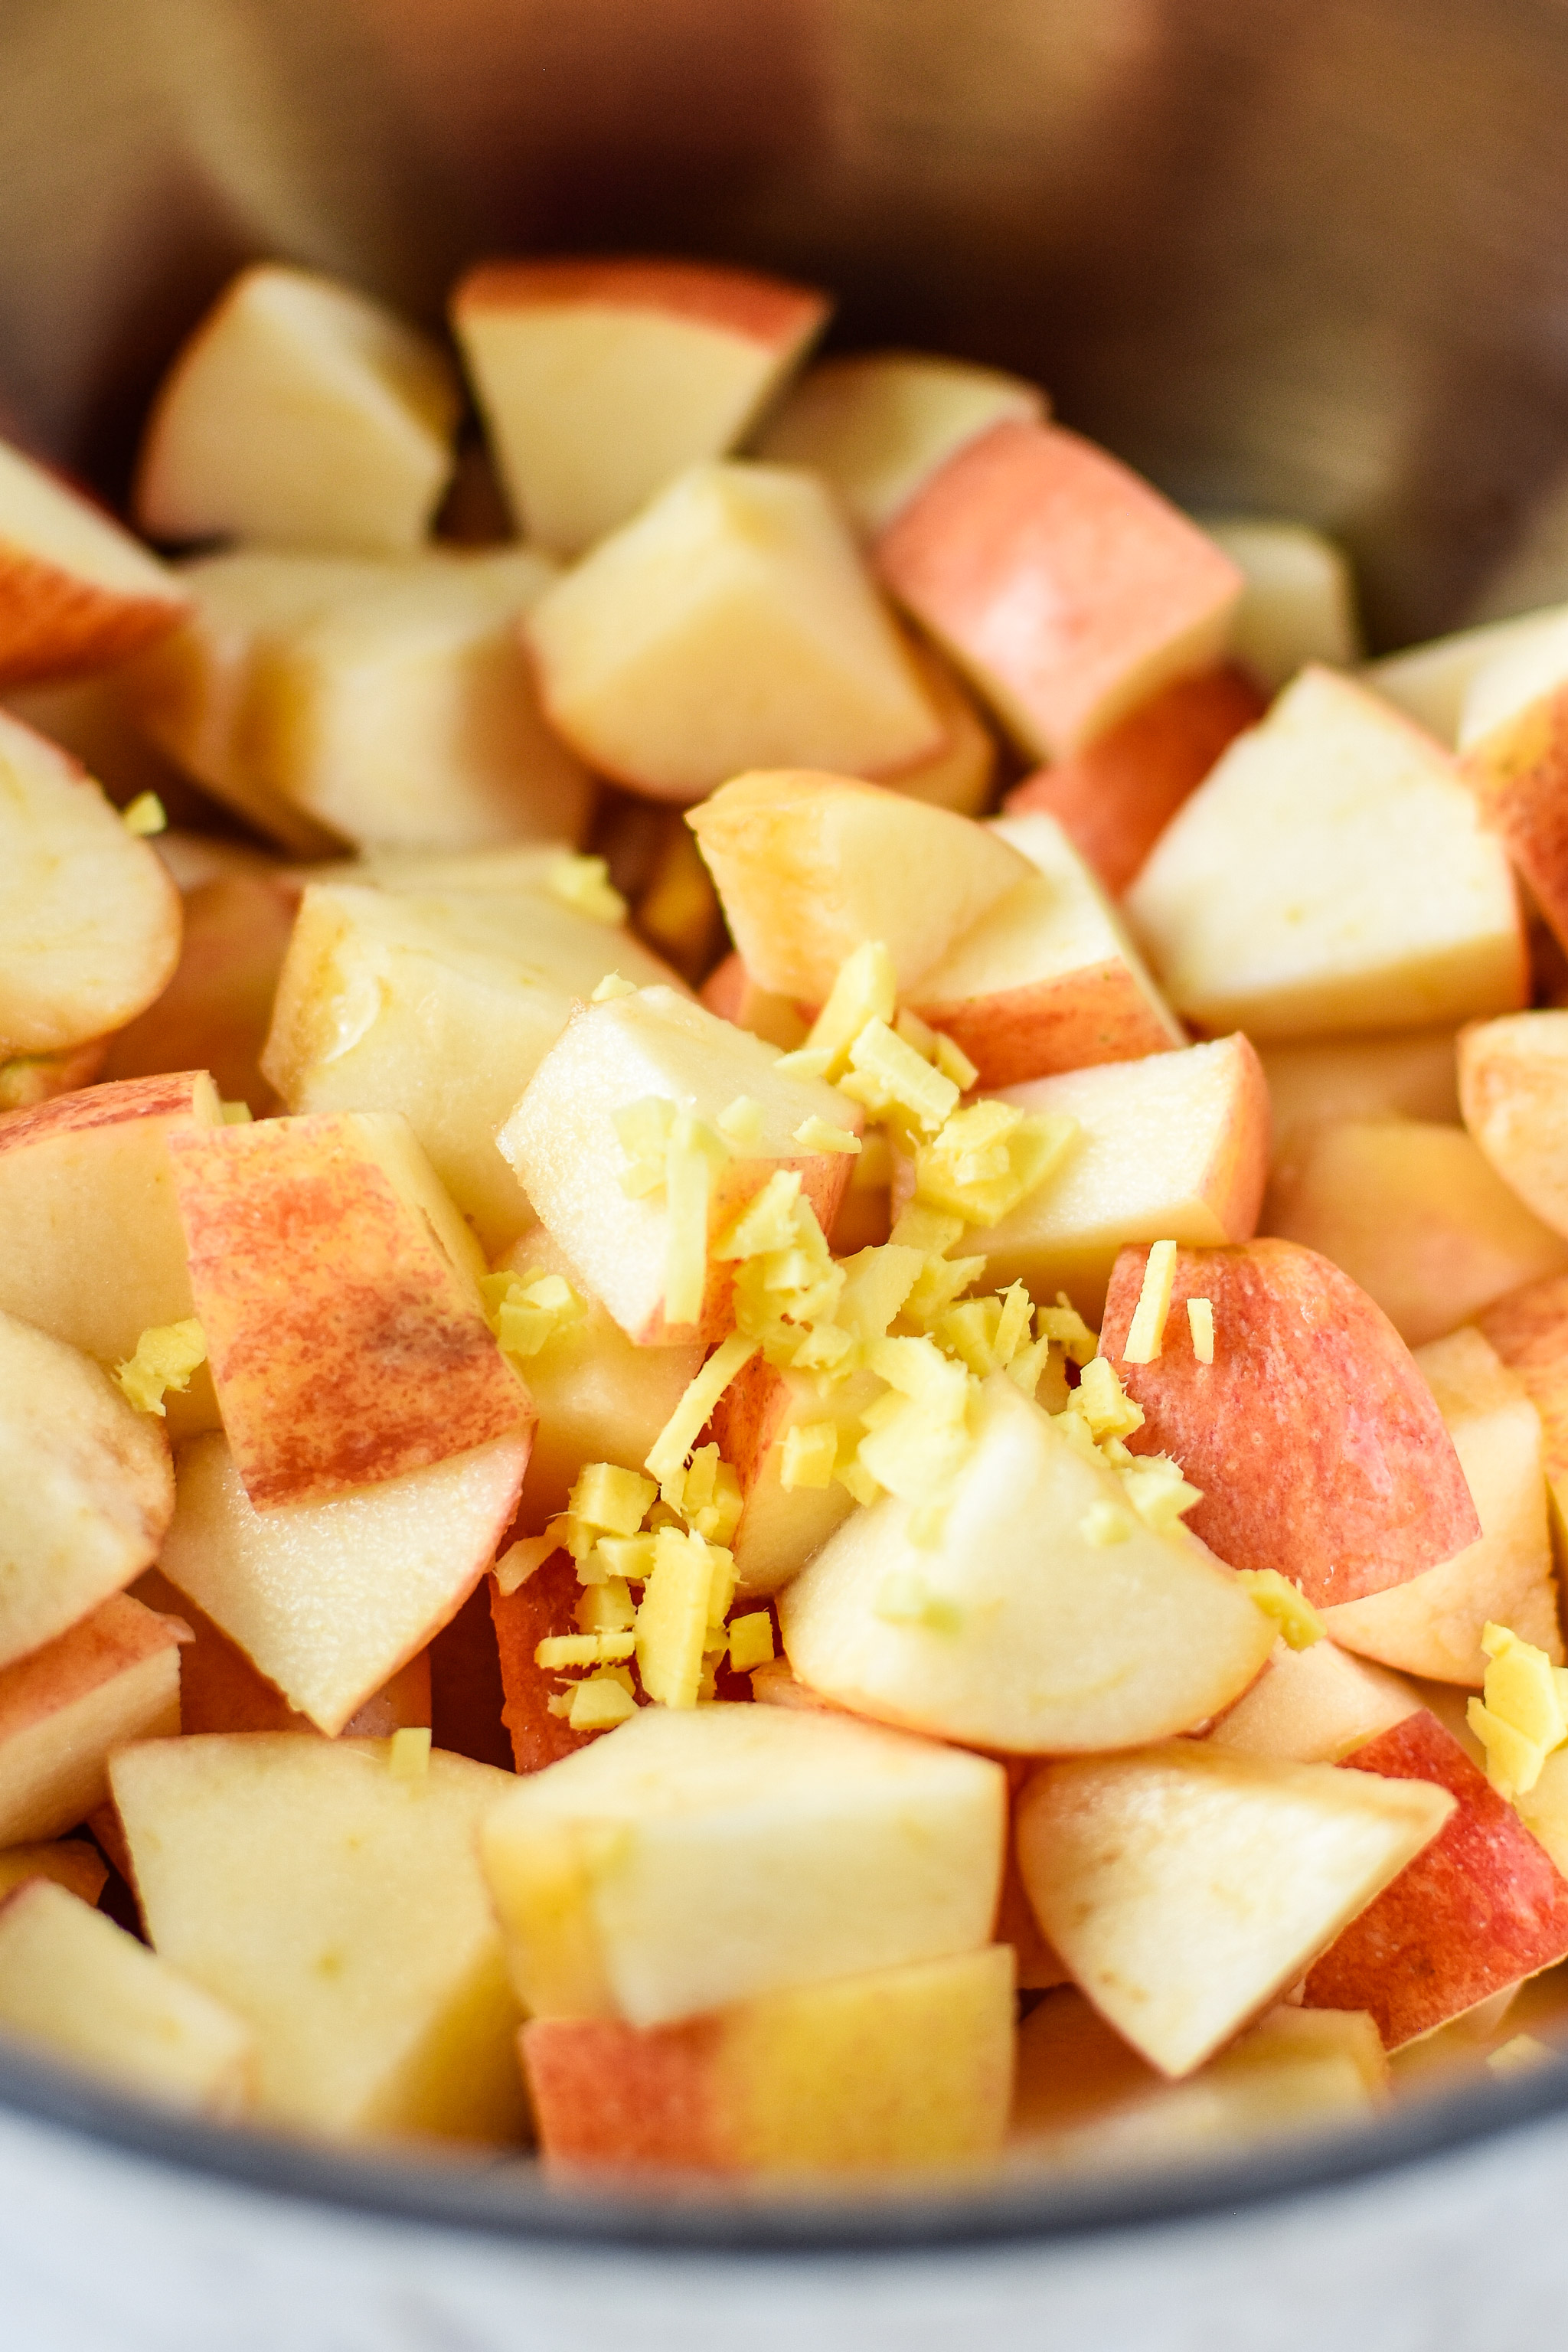 Apples and ginger for the ginger pear cinnamon applesauce